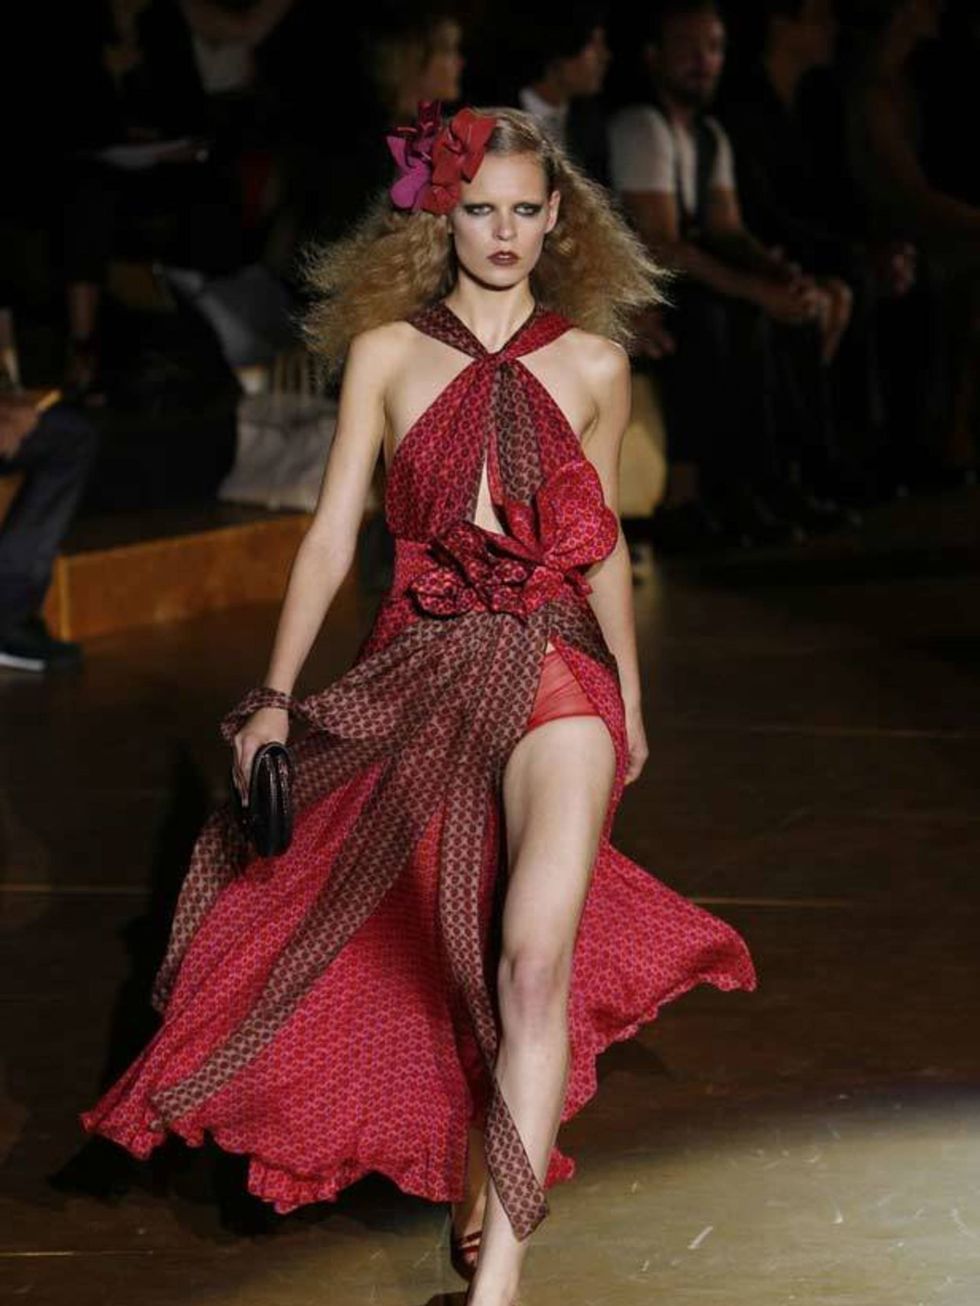 <p>1970's: <a href="http://www.elleuk.com/catwalk/collections/marc-jacobs/spring-summer-2011">Marc Jacobs</a> Spring/Summer 2011 catwalk show</p>